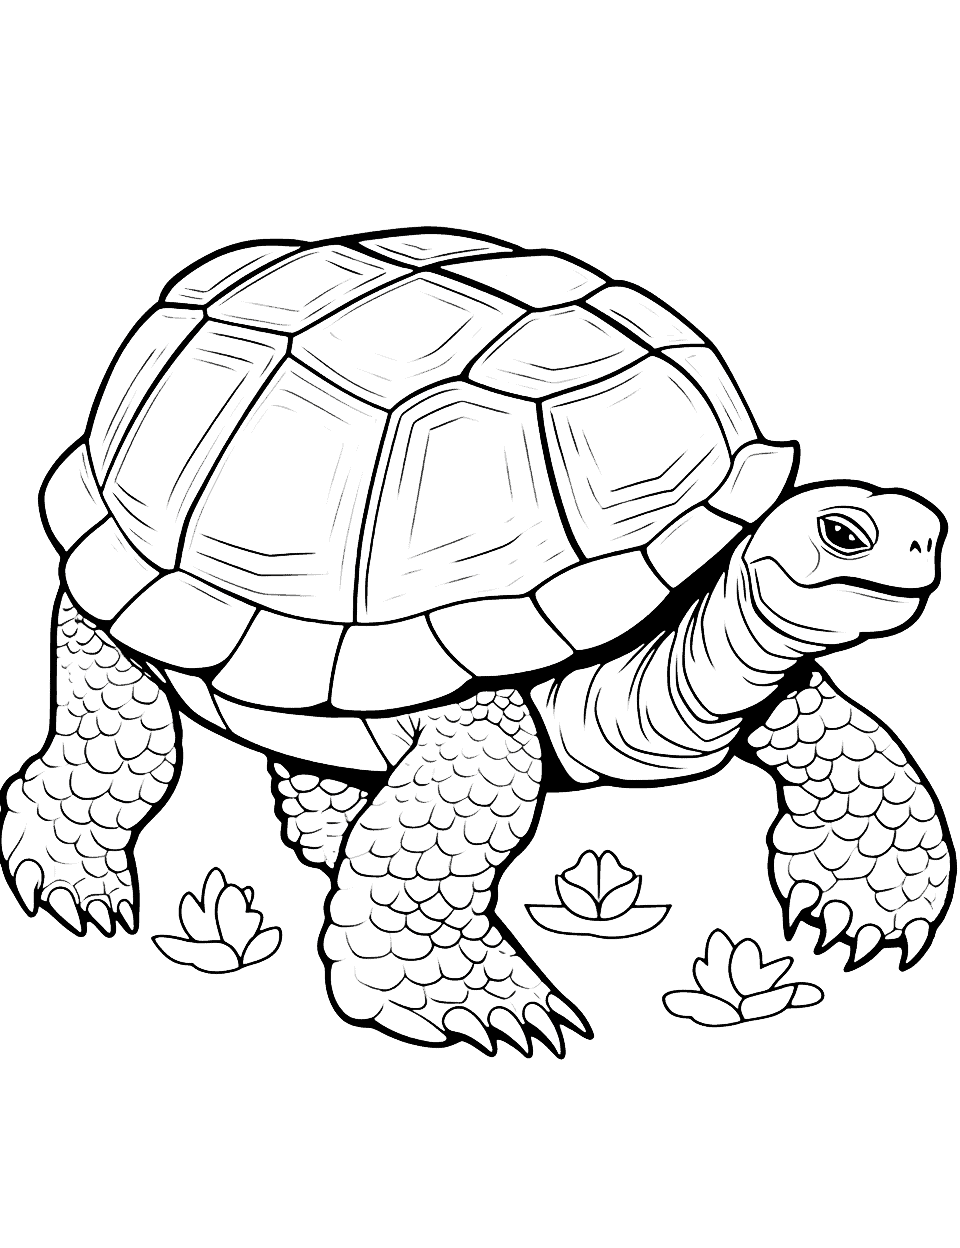 Wise Tortoise Animal Coloring Page - A wise and old tortoise slowly moving across the ground.